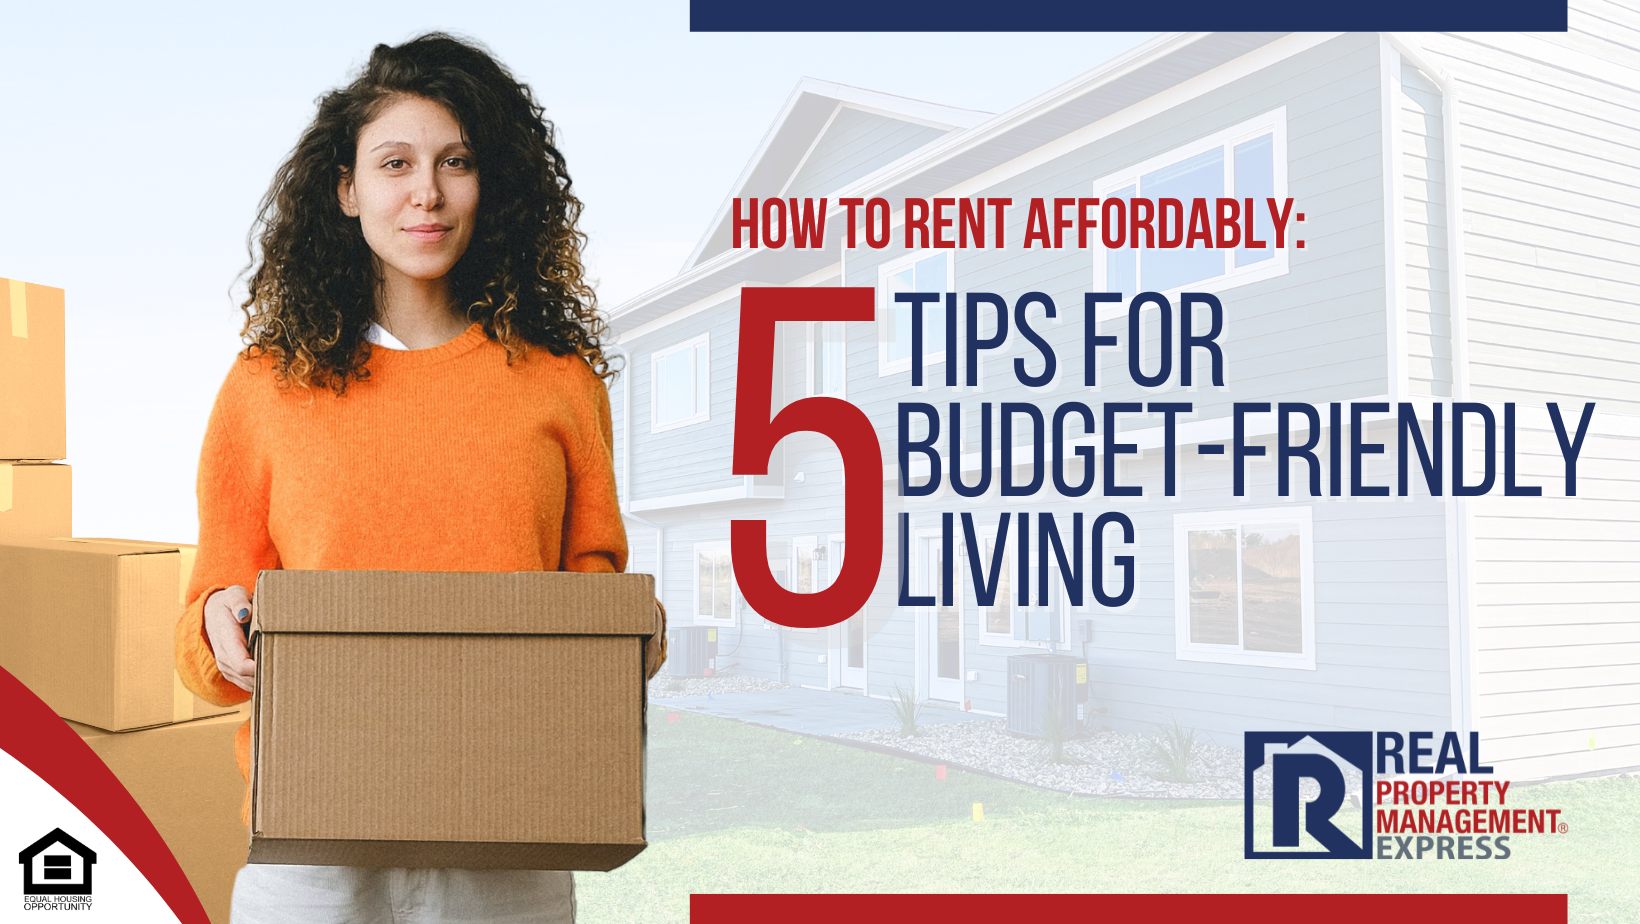 How to Rent Affordably: 5 Tips for Budget-friendly Living